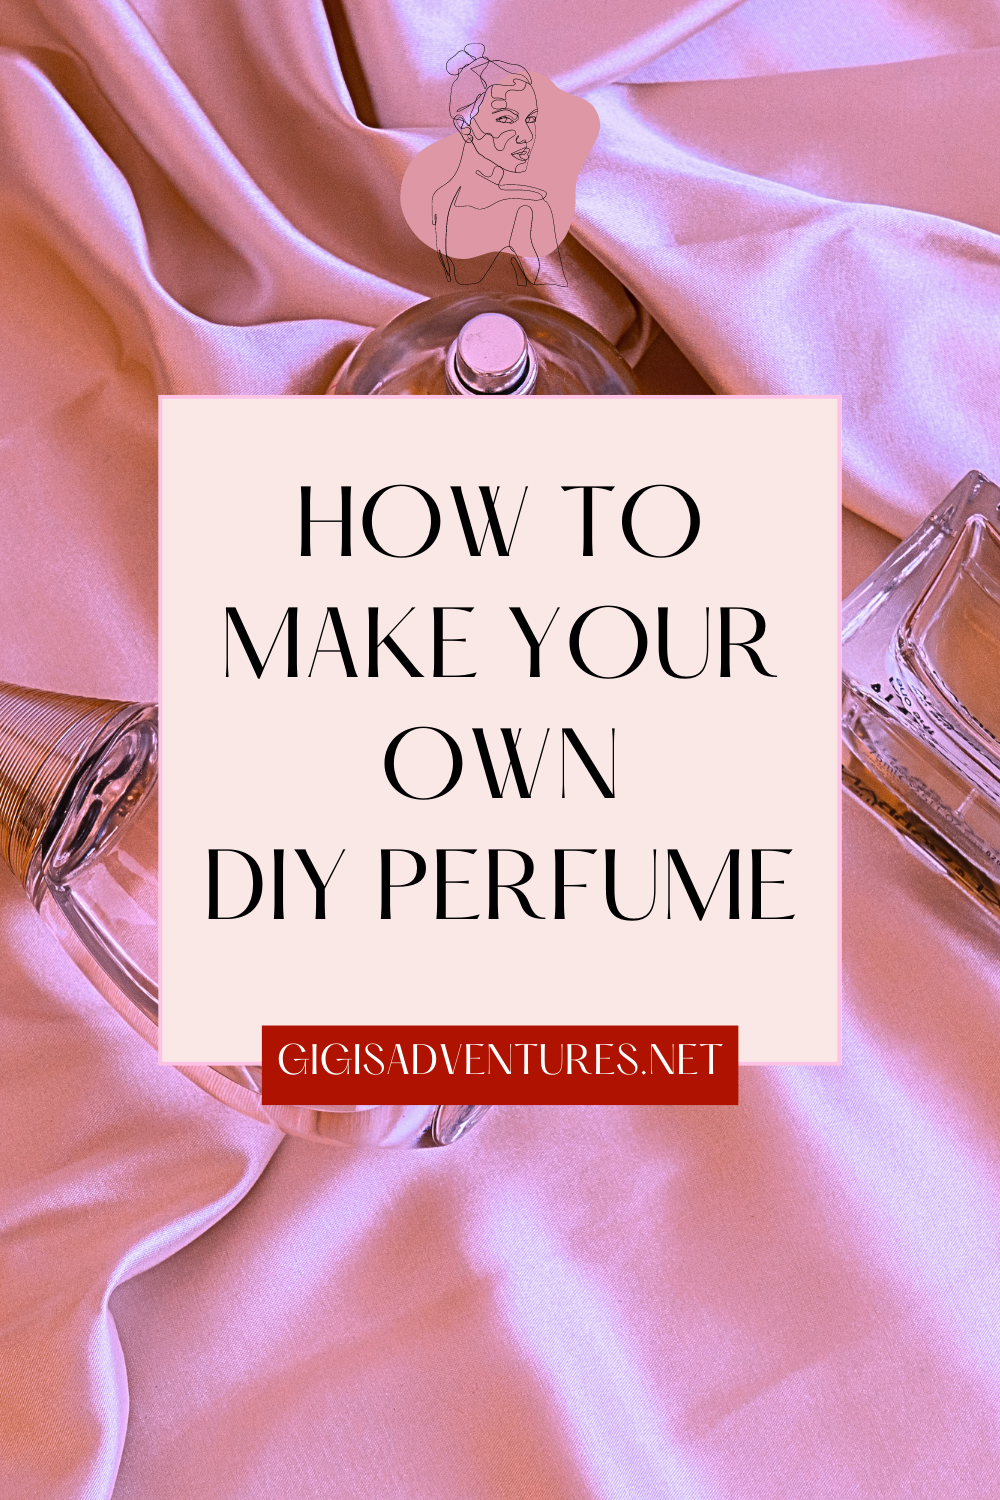 Scent-sational! How to Make Your Own DIY Perfume | DIY Perfume